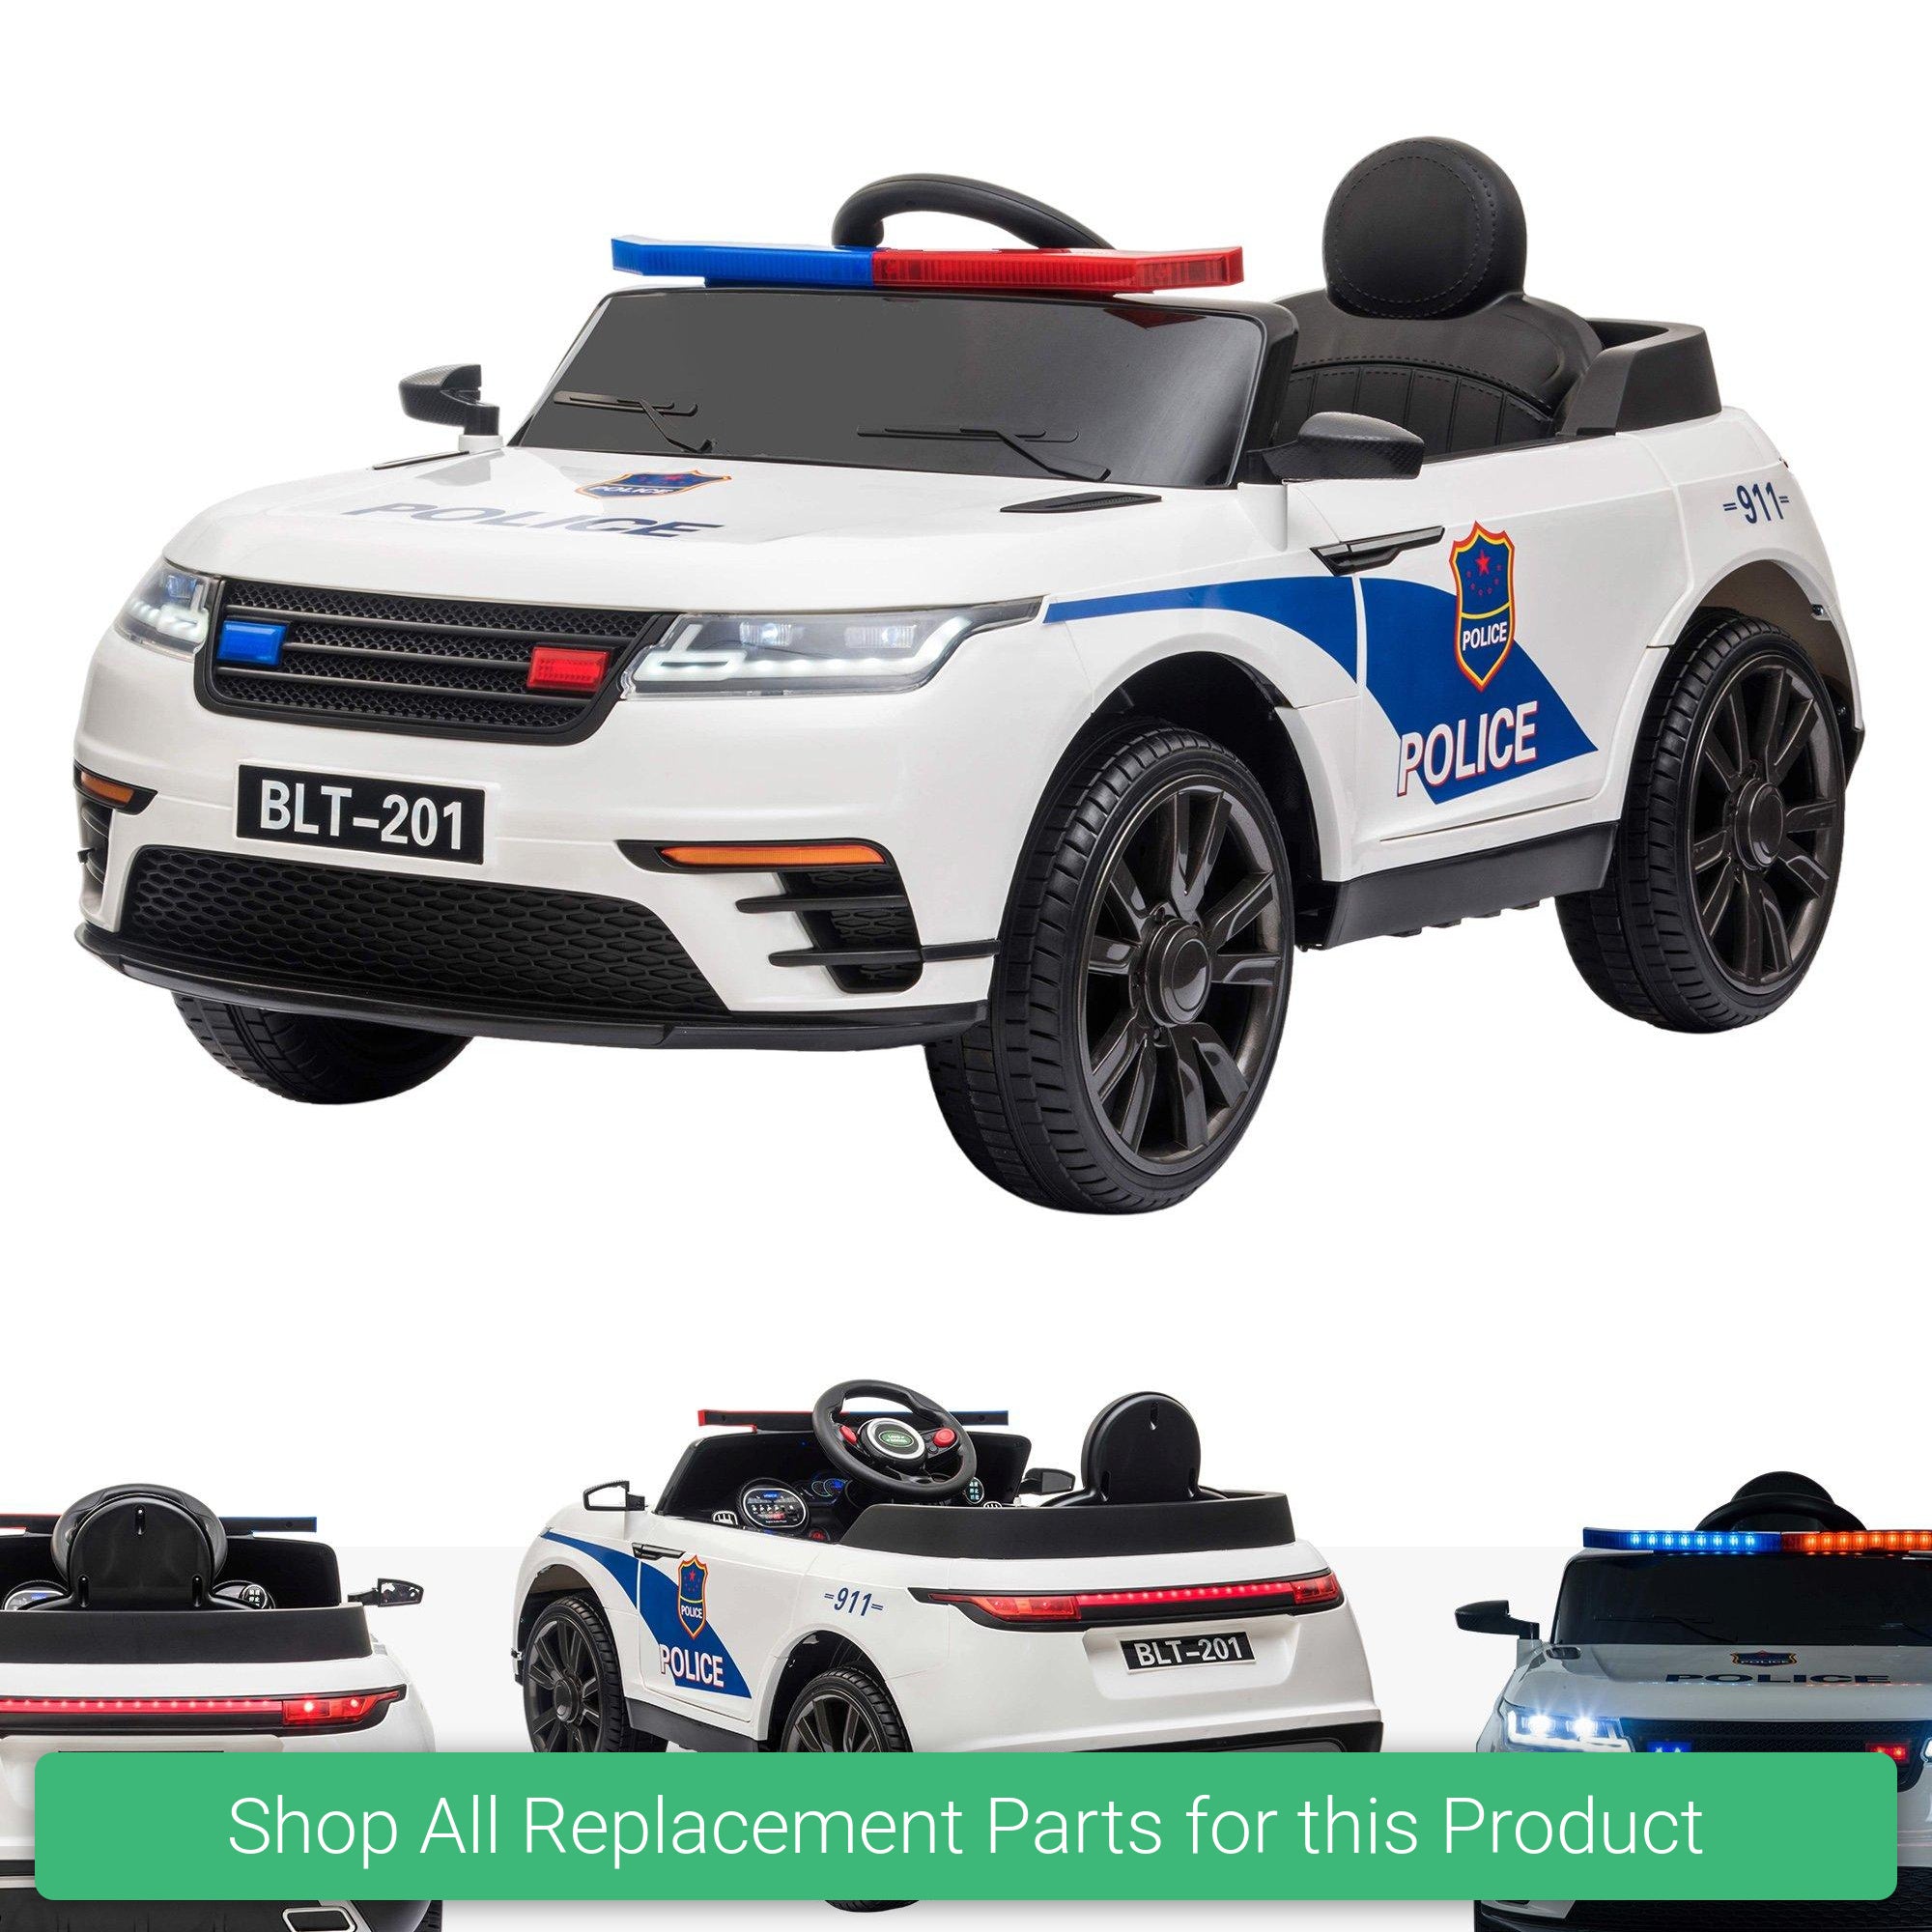 Replacement Parts and Spares for Kids Range Rover Velar Style - Police Edition - R4G-VEL-POL - BLT201